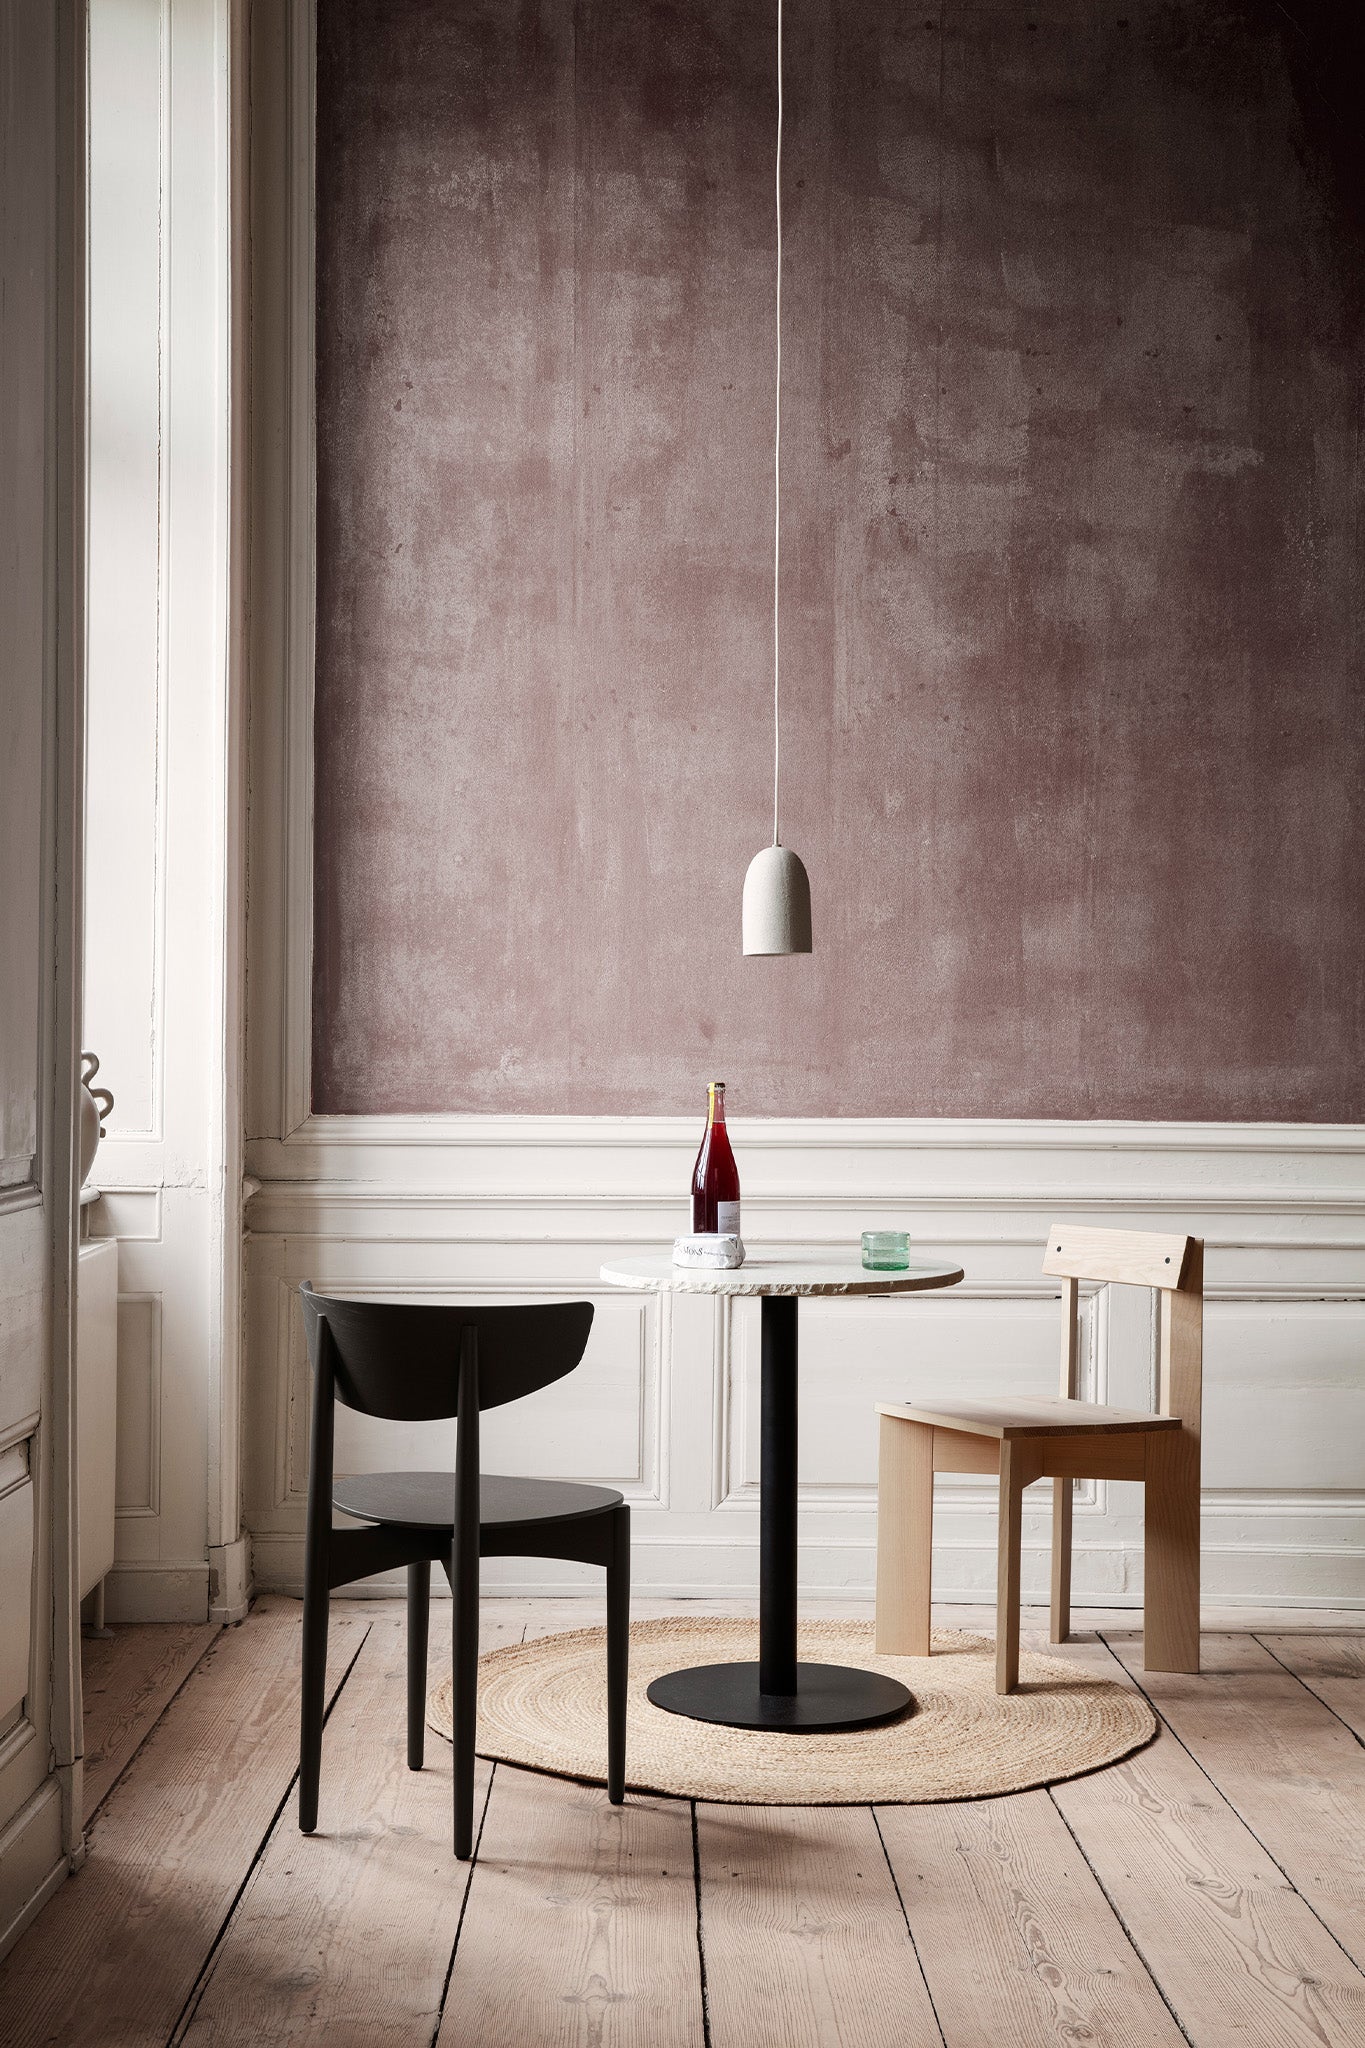 Herman Dining Chair in Black. Image by Ferm Living